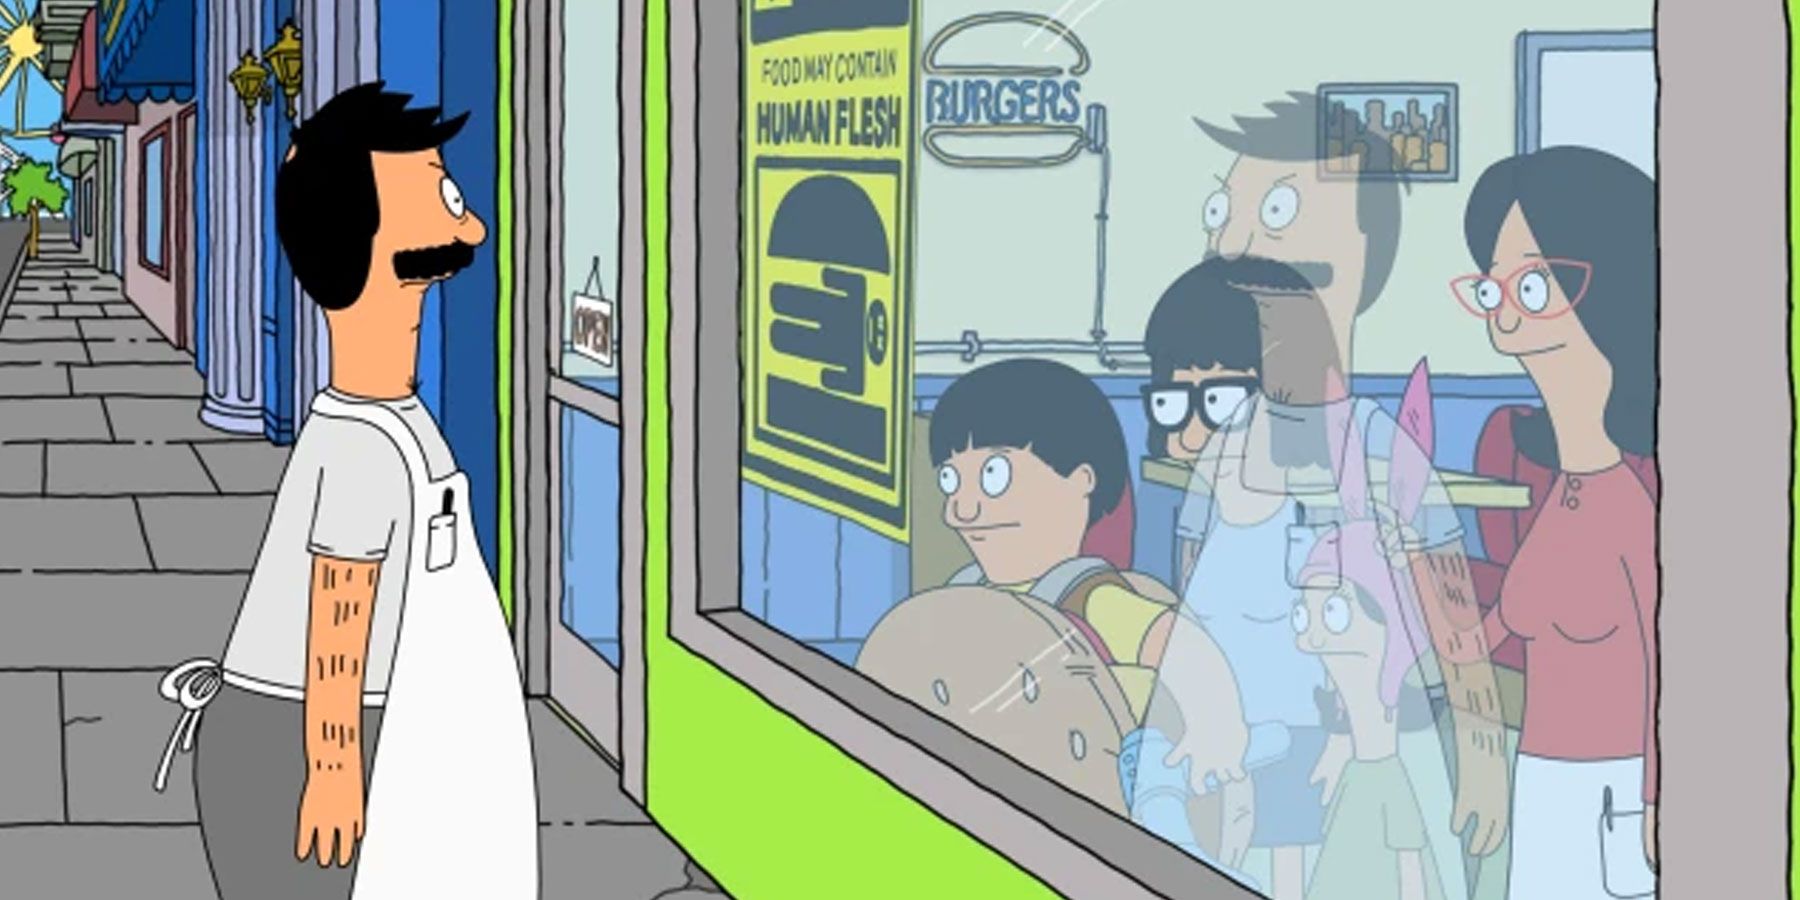 Bob staring angrily at the window while his family watches in Bobs Burgers